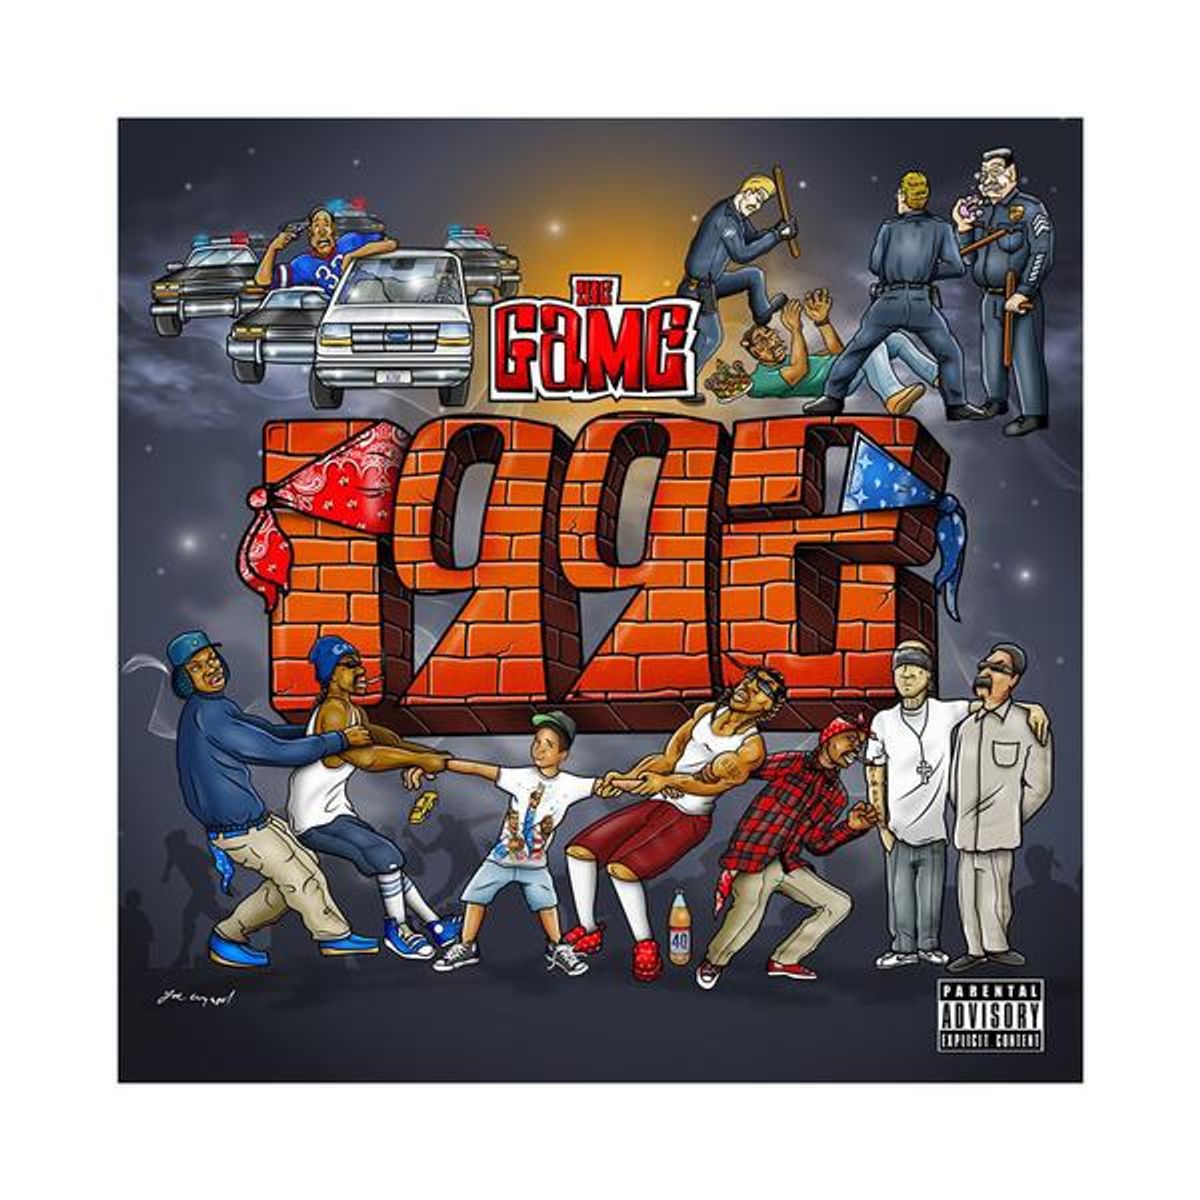 The Game's 1992